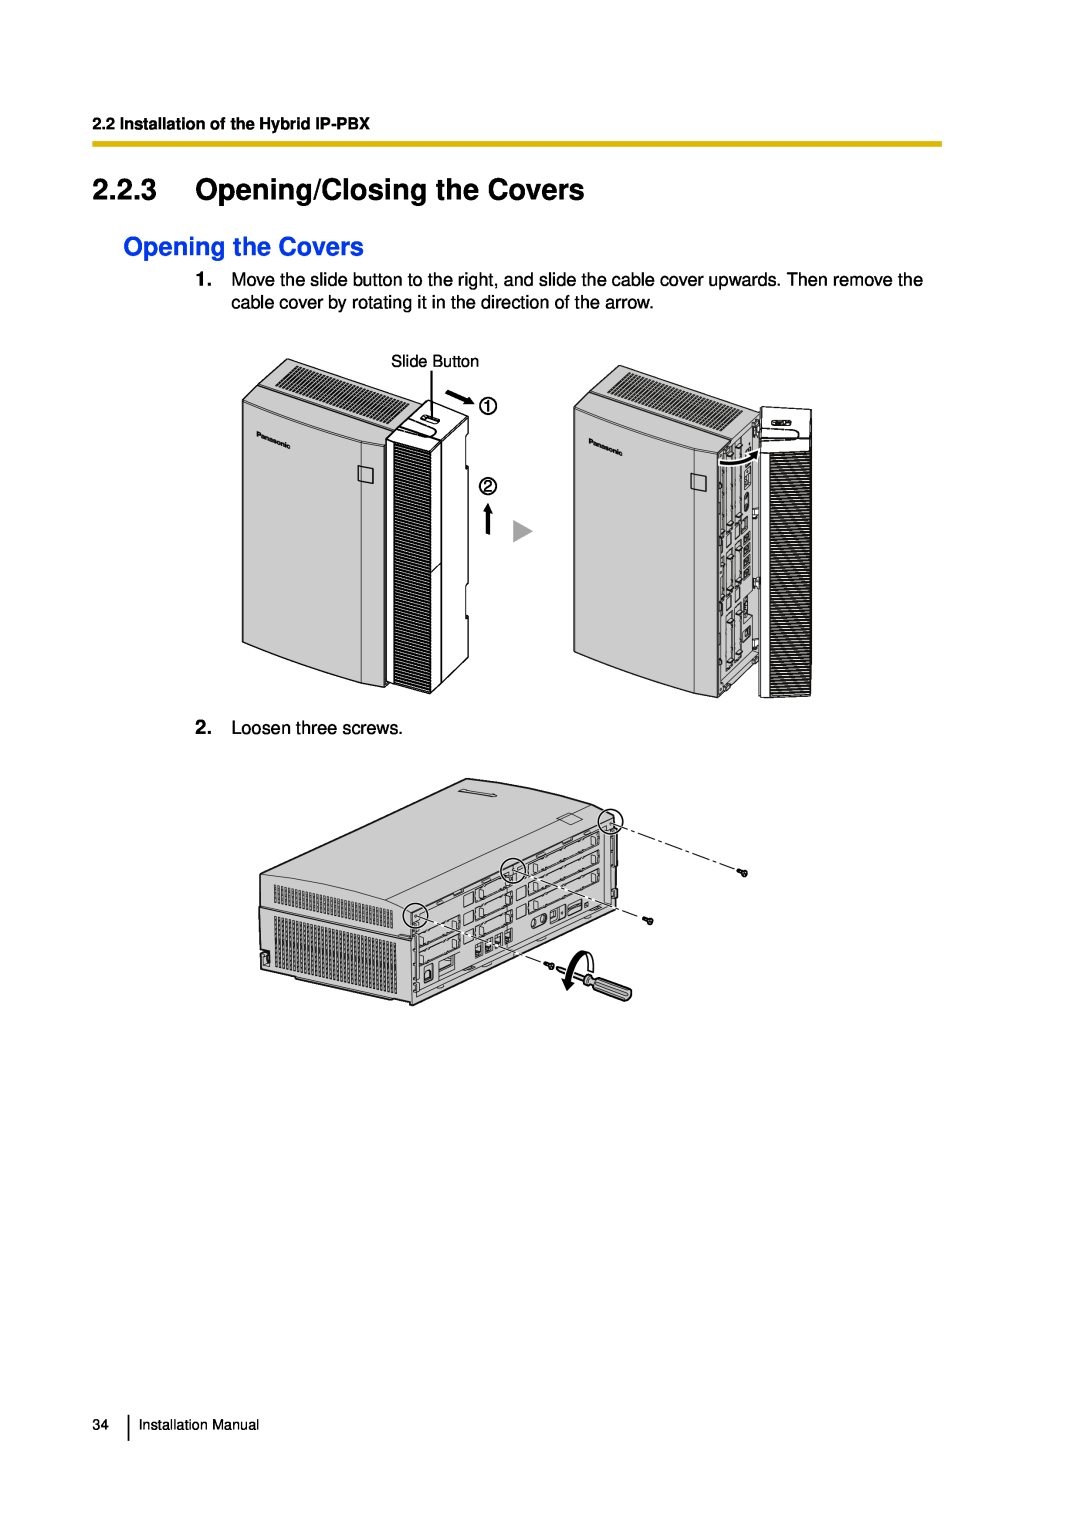 Panasonic KX-TDA30 2.2.3Opening/Closing the Covers, Opening the Covers, Installation of the Hybrid IP-PBX 